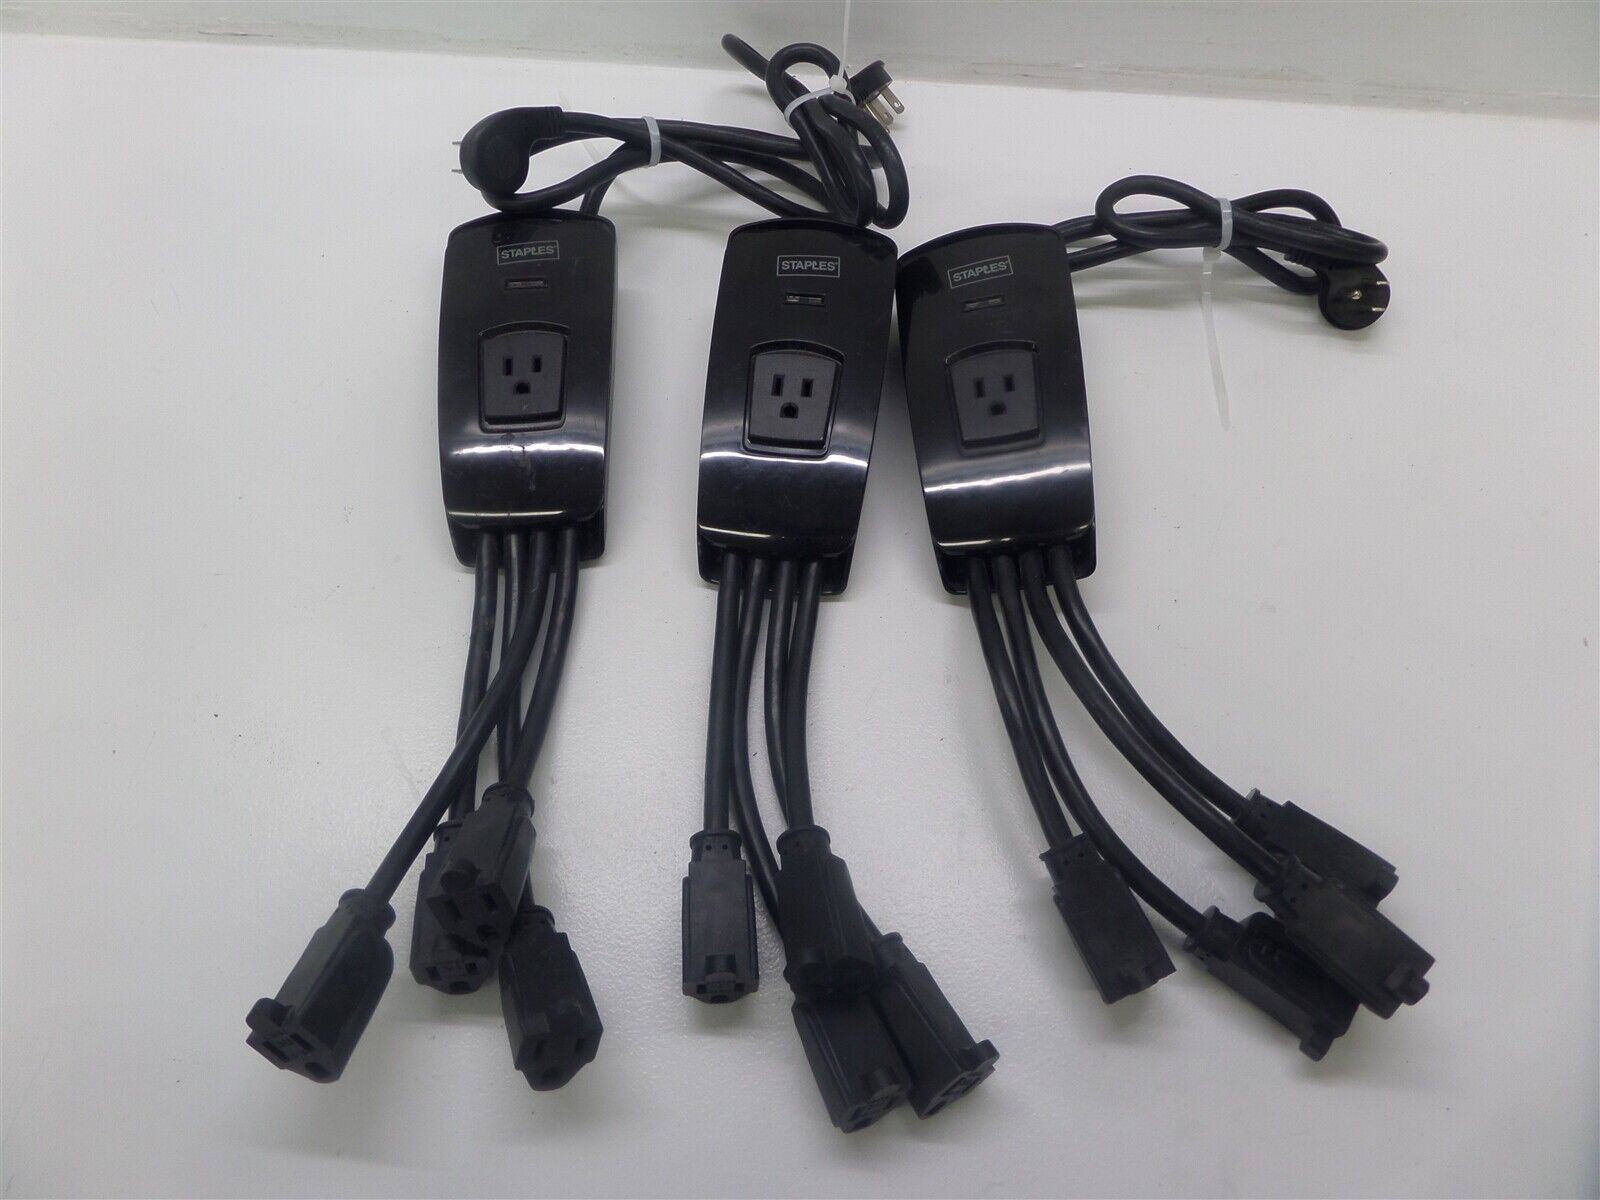 Lot Of 3 Staples Relocatable 5-Outlet PowerTap Power Supplies 19023